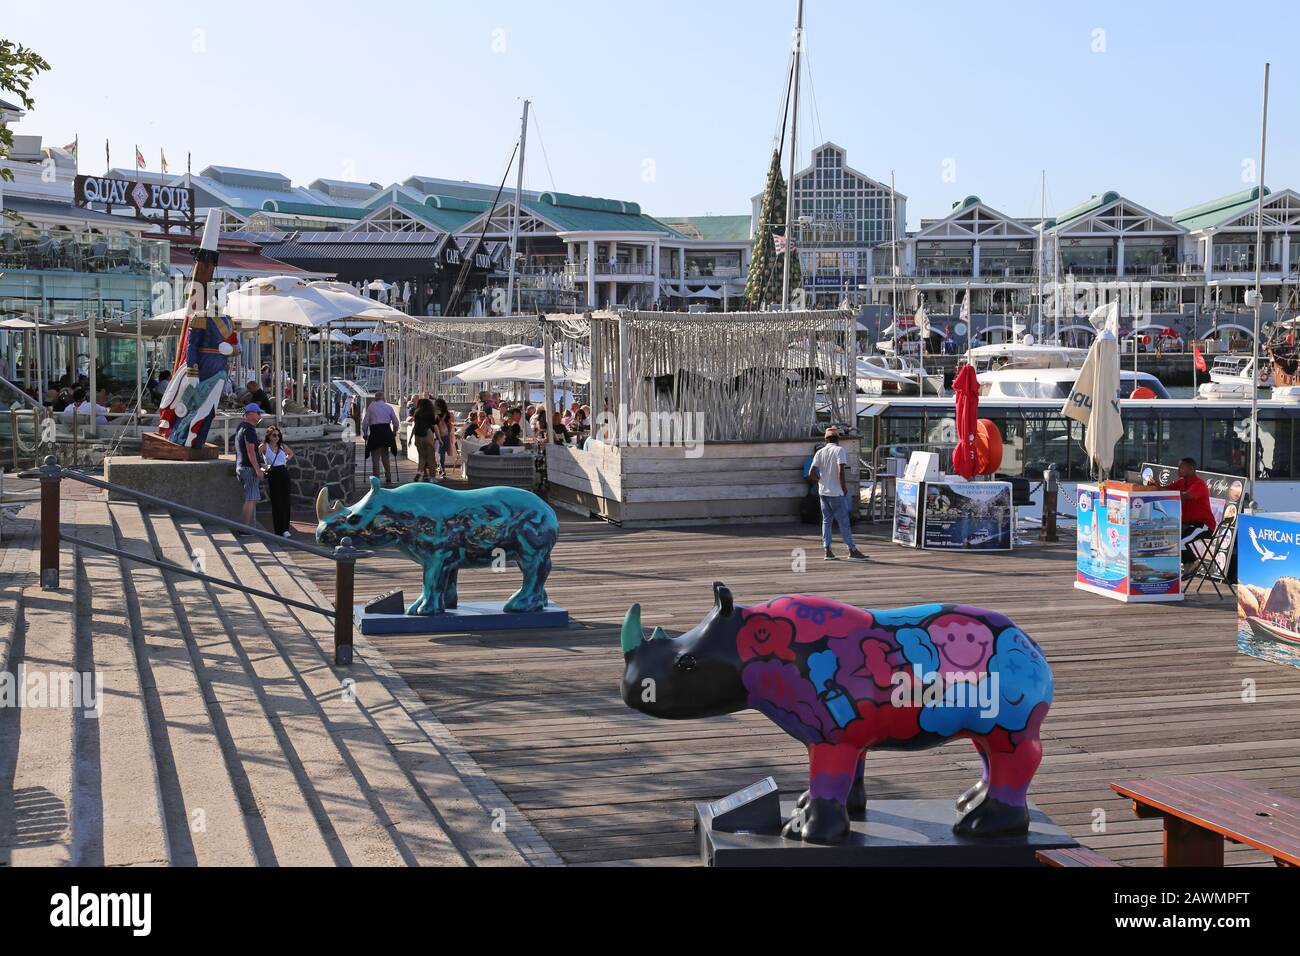 Old Pierhead Square, V&A Waterfront, Cape Town, Table Bay, Western Cape Province, South Africa, Africa Stock Photo